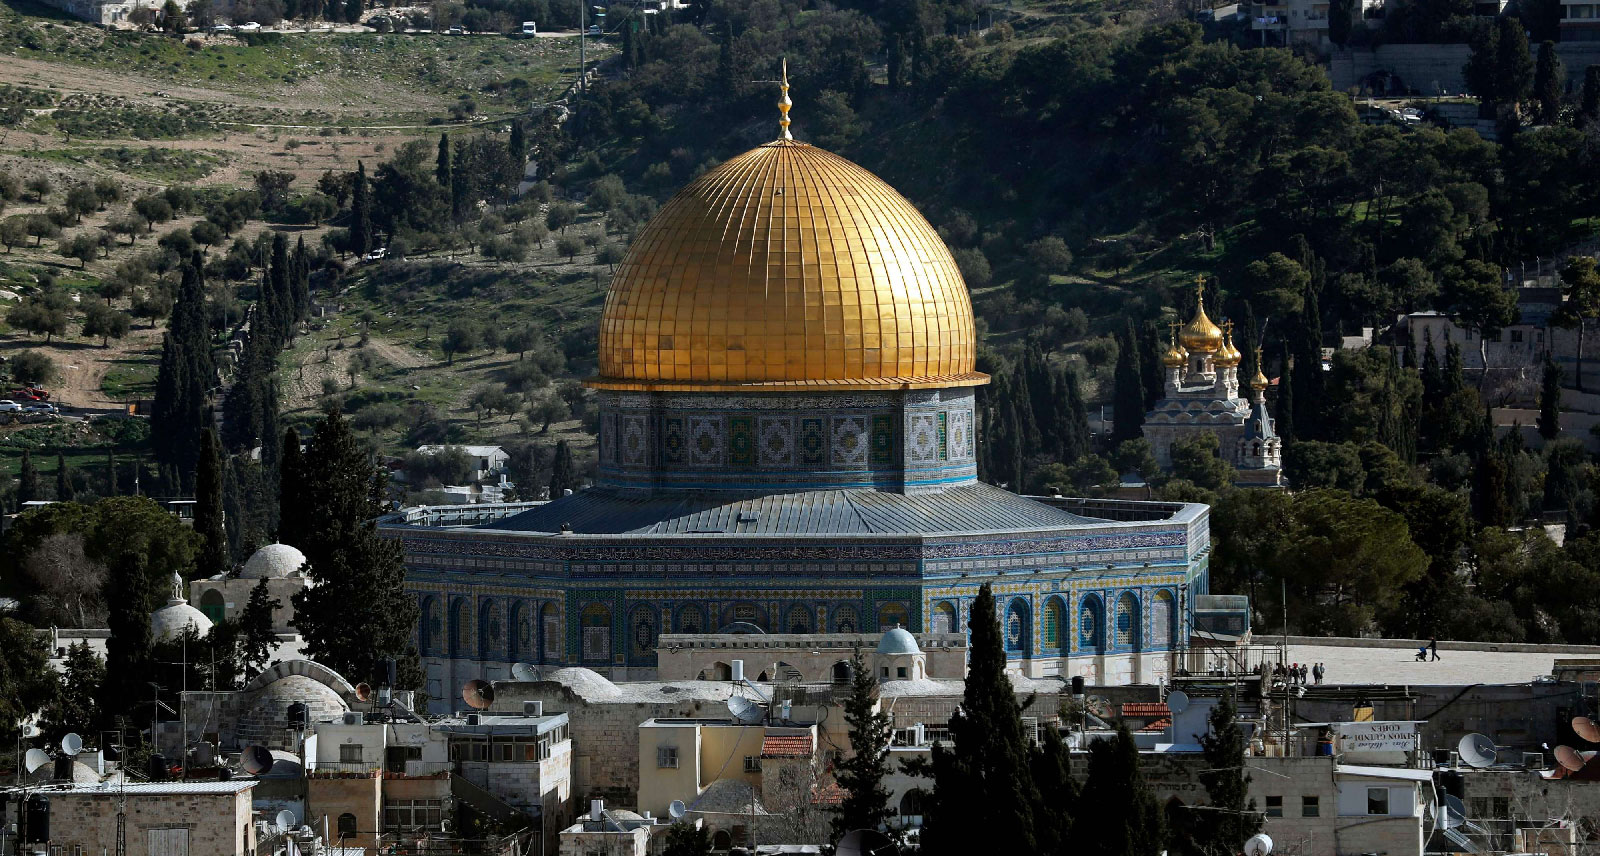 The Dome of the Rock, situated in the al-Aqsa mosque compound in Jerusalem's Israeli-occupied old city, and the Russian Church of Mary Magdalene (R) are pictured on January 23, 2019.